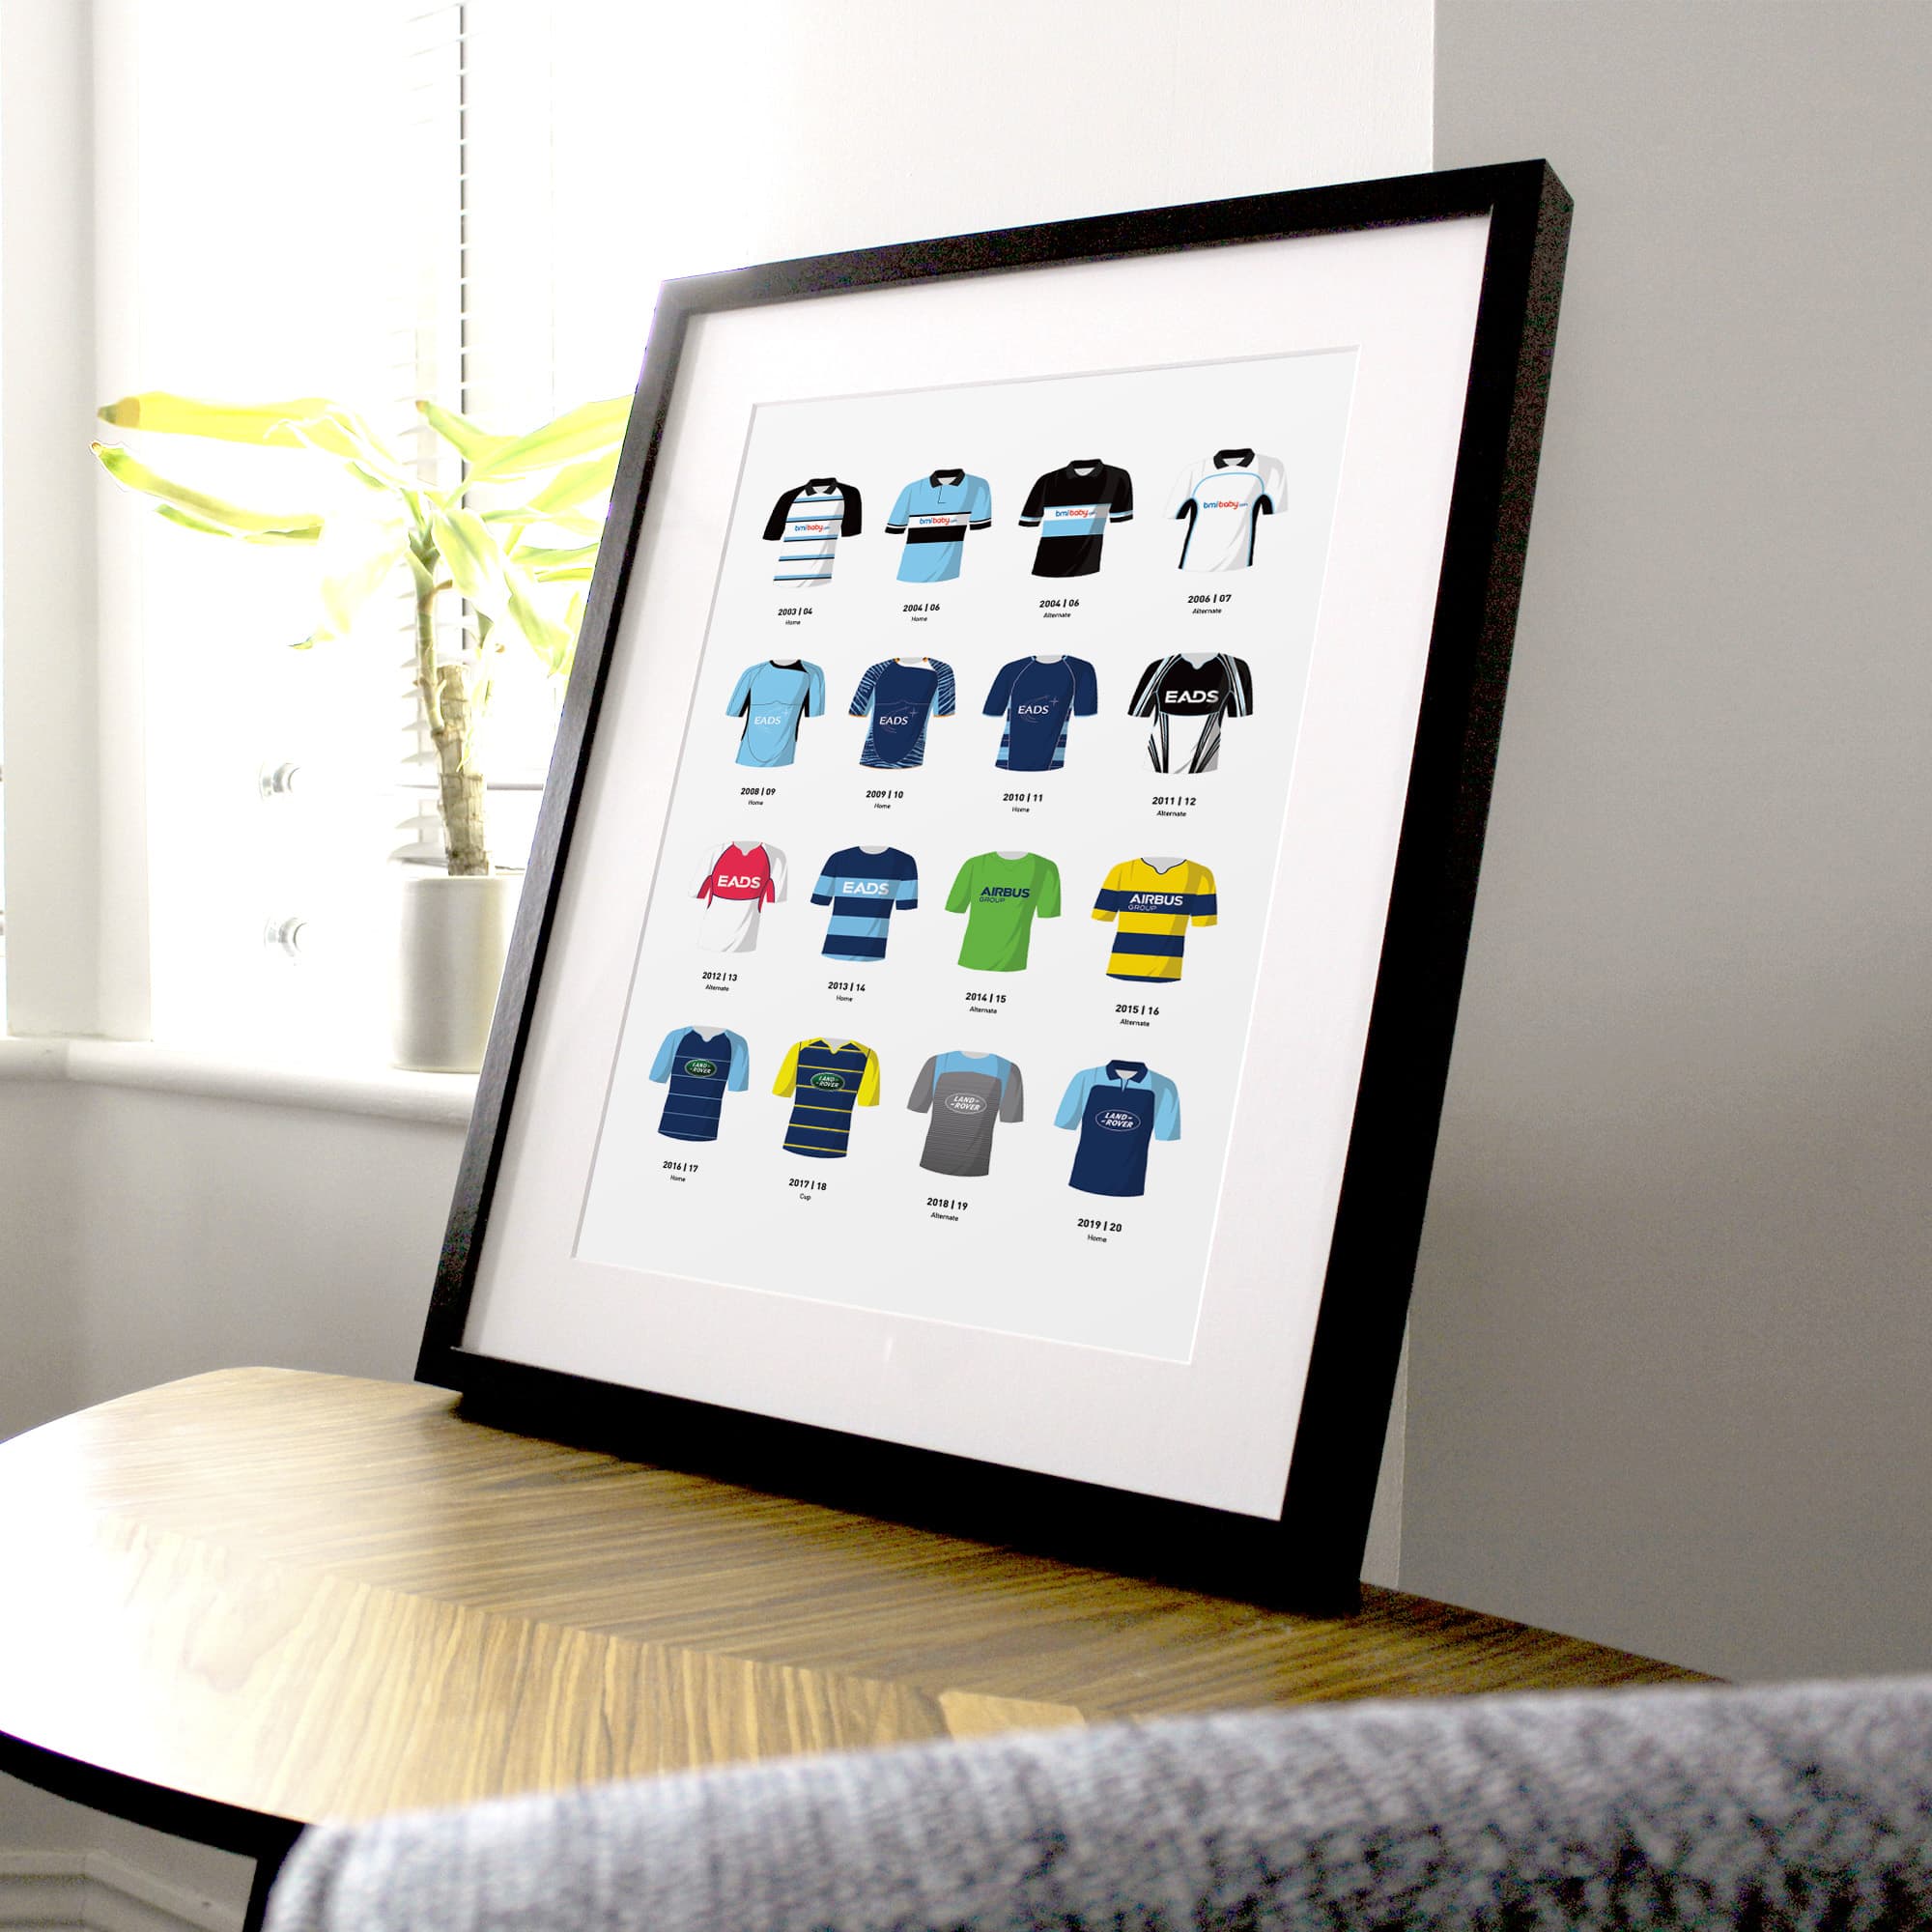 Cardiff Classic Kits Rugby Union Team Print